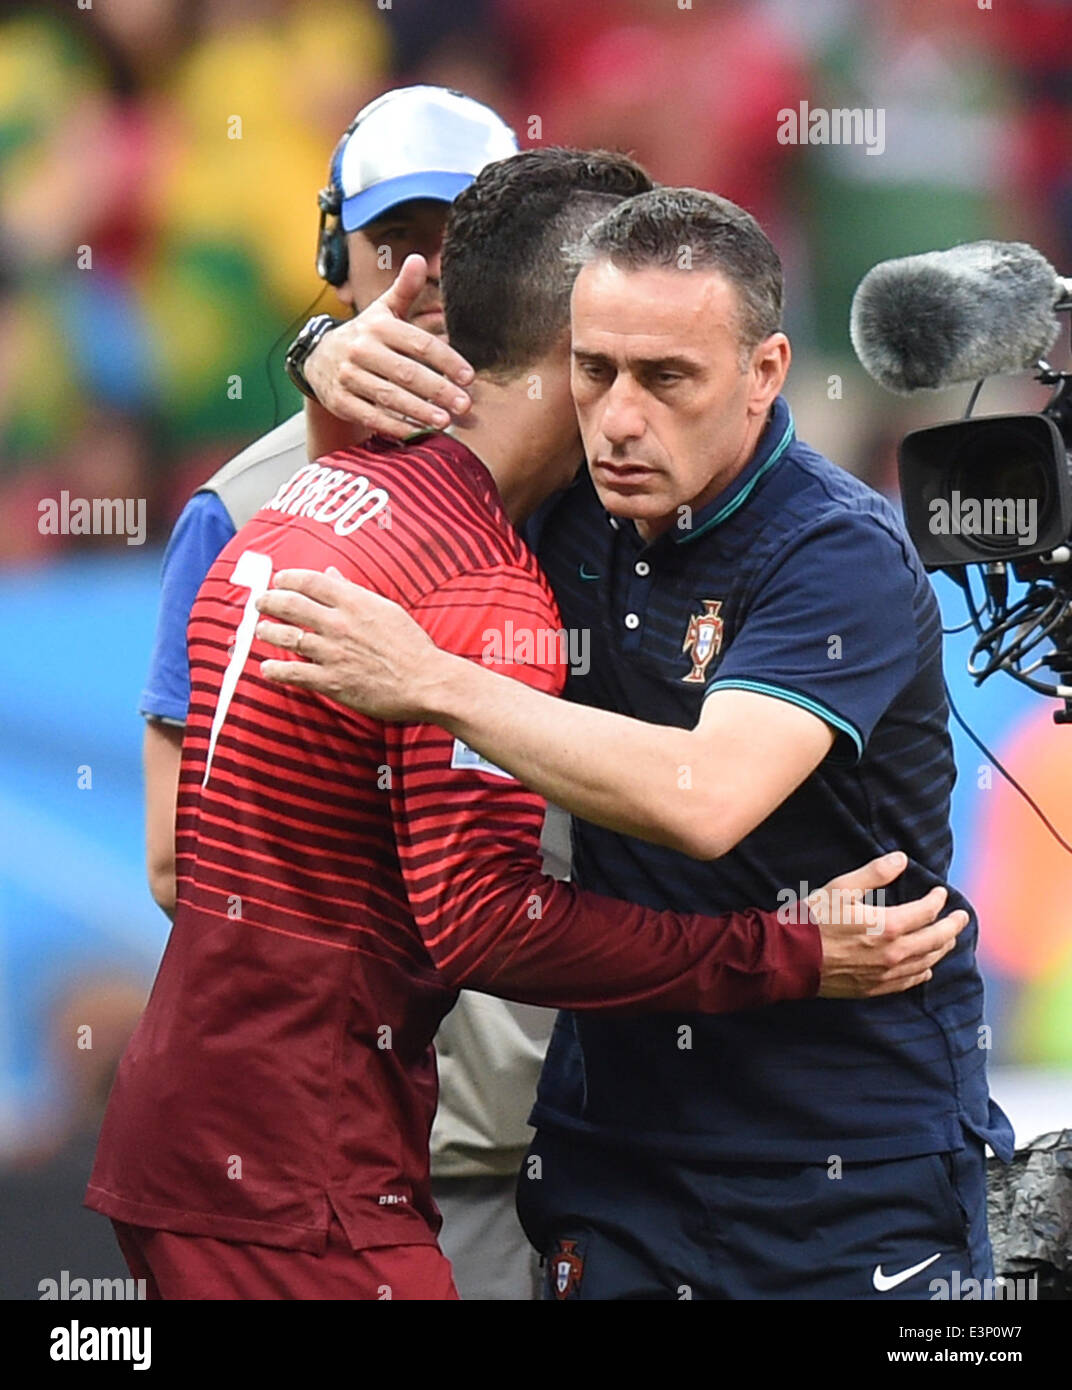 Brasilia, Brazil. 26th June, 2014. Cristiano Ronaldo (L) of Portugal hugs Portugal's head coach Paulo Bento after the FIFA World Cup 2014 group G preliminary round match between Portugal and Ghana at the Estadio National Stadium in Brasilia, Brazil, on 26 June 2014 Credit: © dpa picture alliance/Alamy Live News  Stock Photo